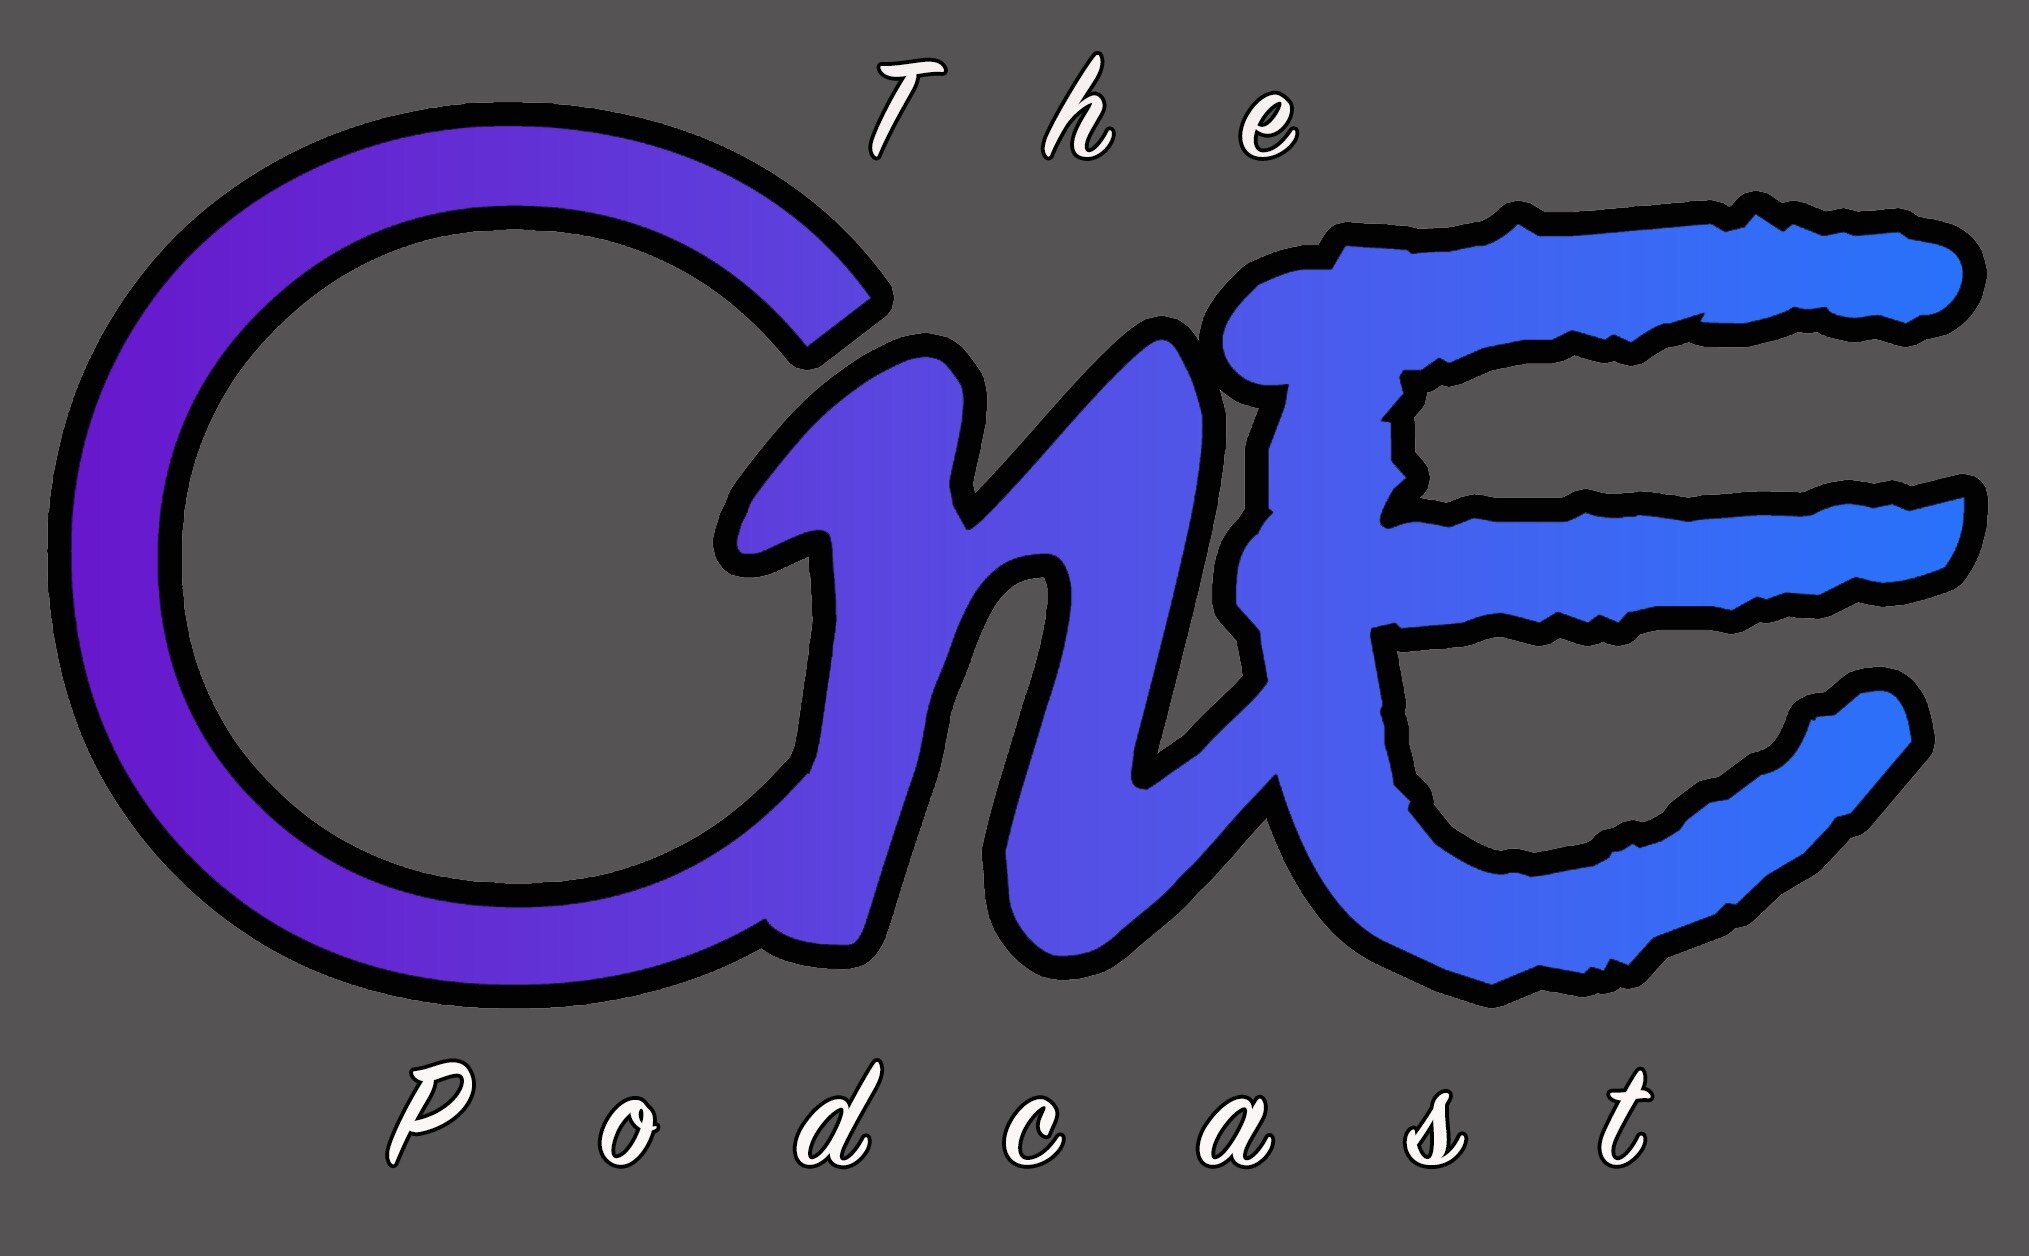 CnE Podcast, featuring Cordell Barnes and Elisha Willis, is hosted by Gerald King.